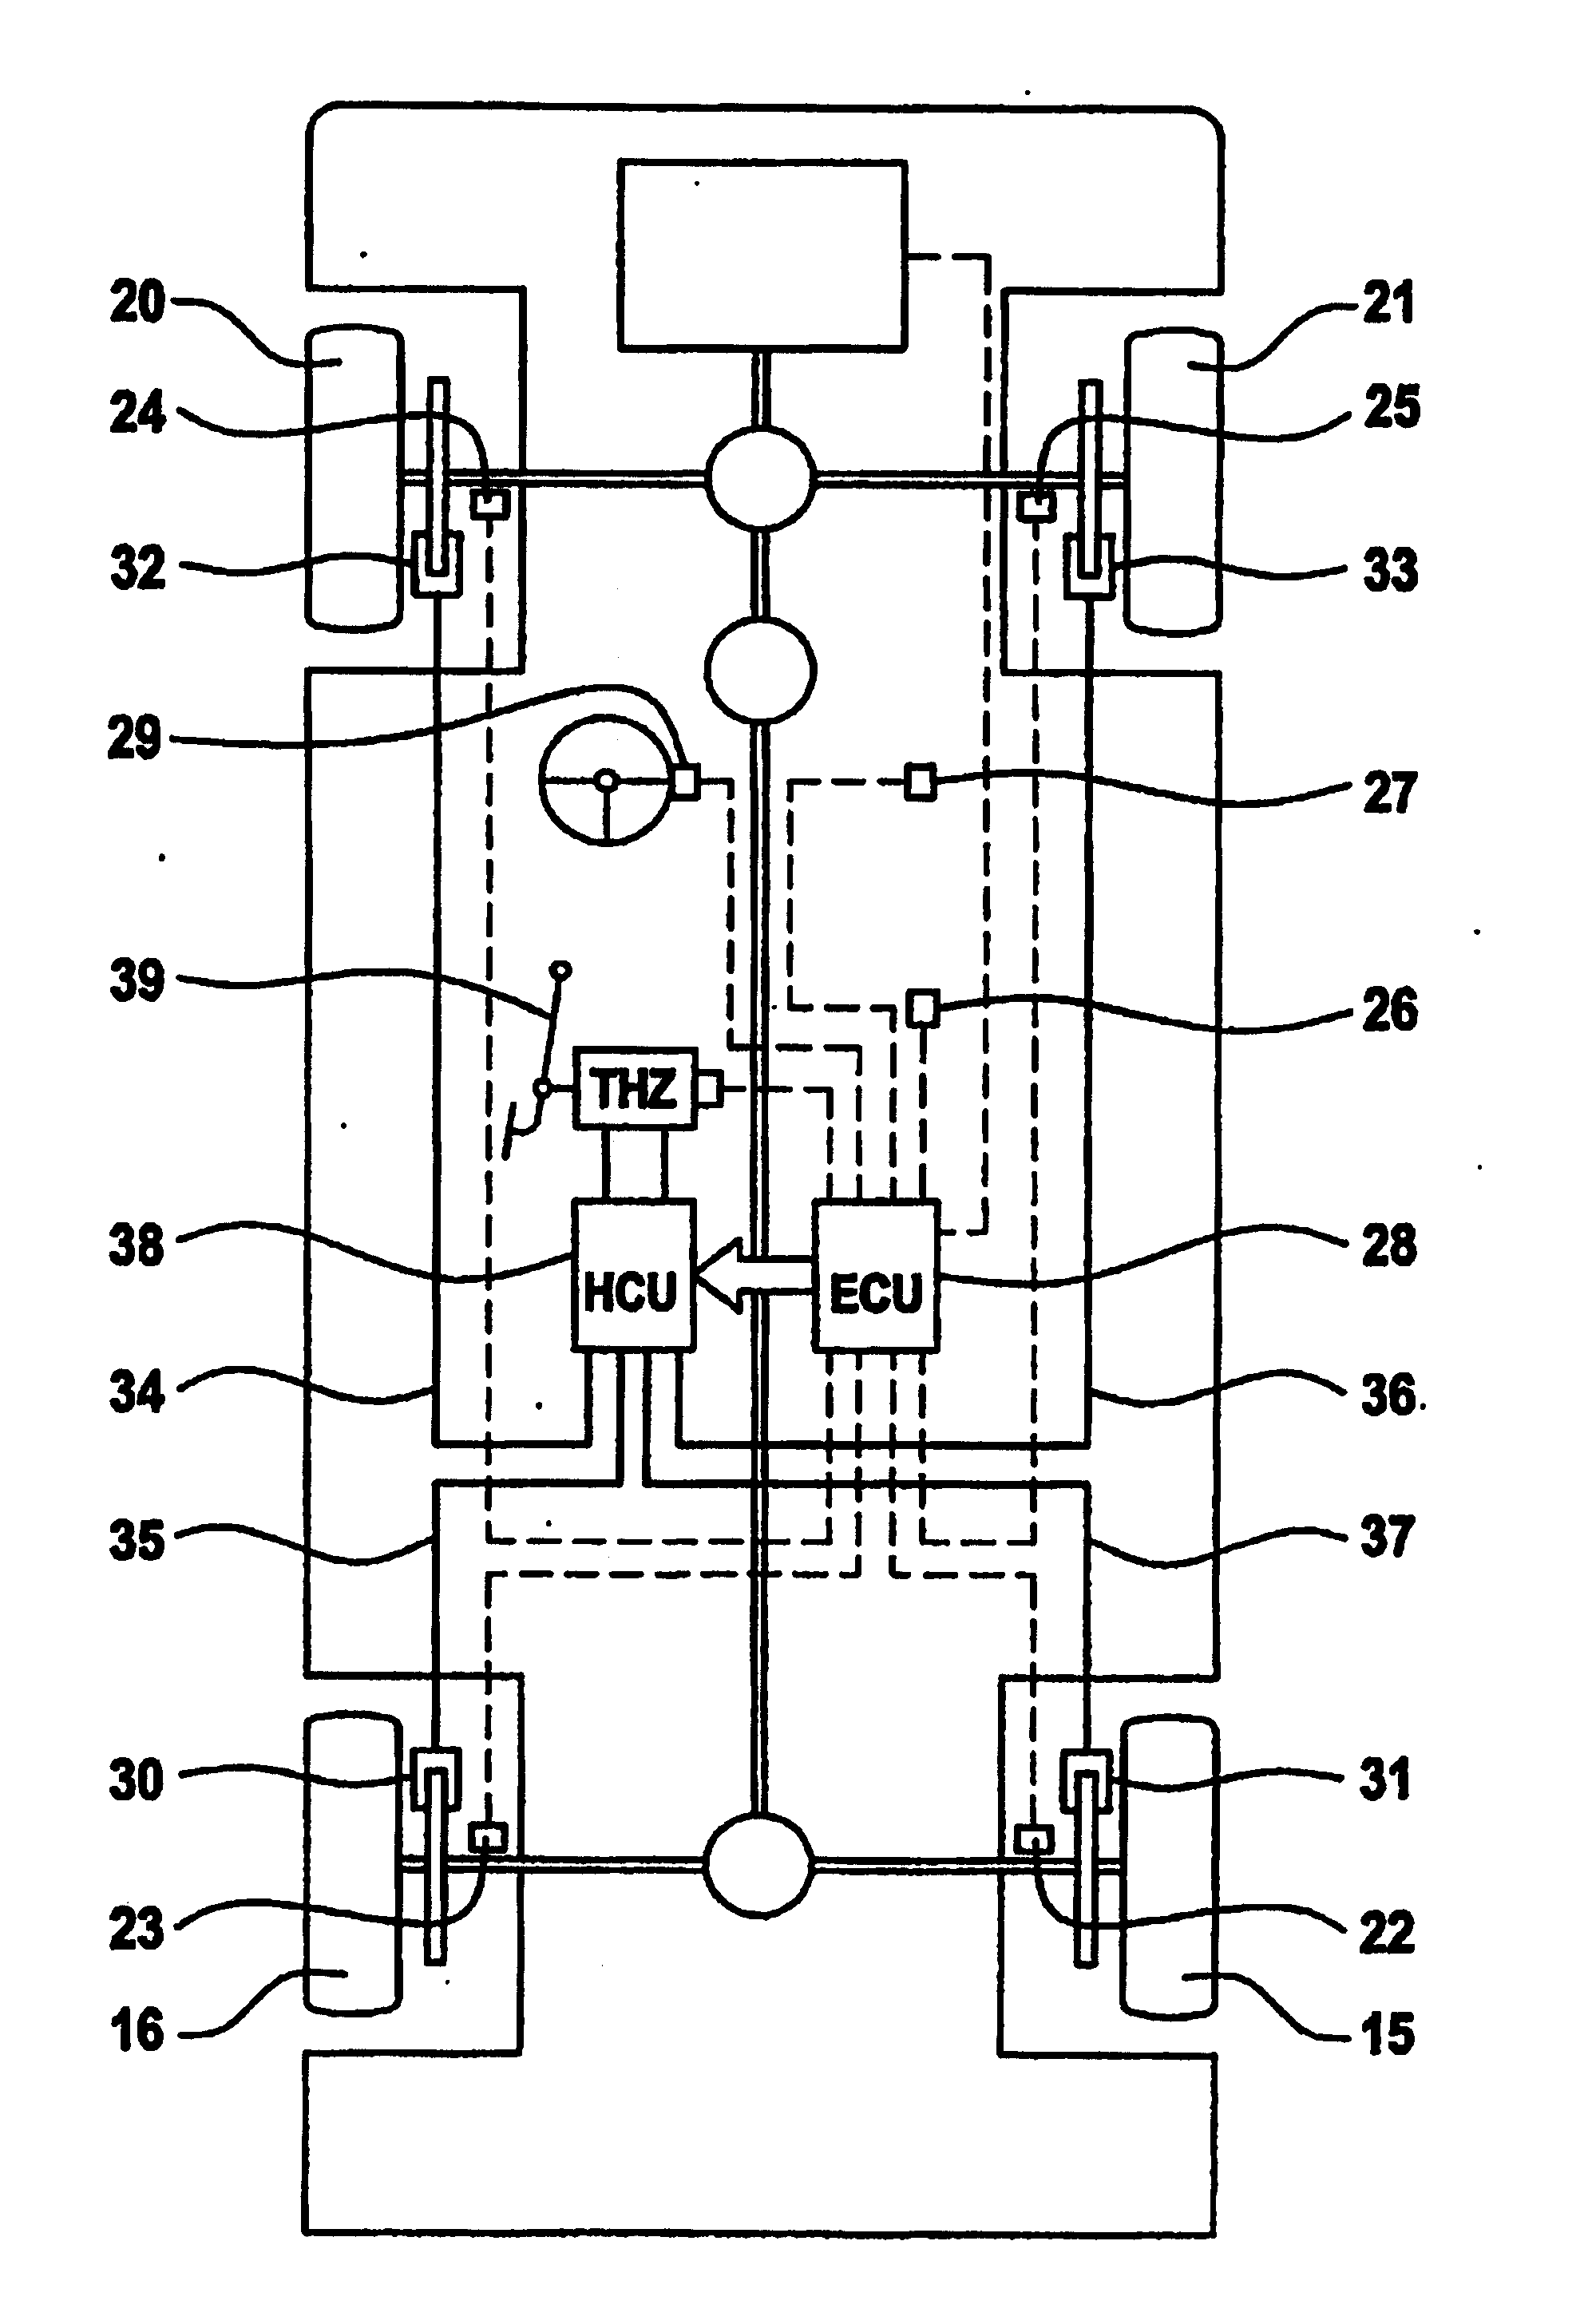 Method and system for stabilizing a car-trailer combination